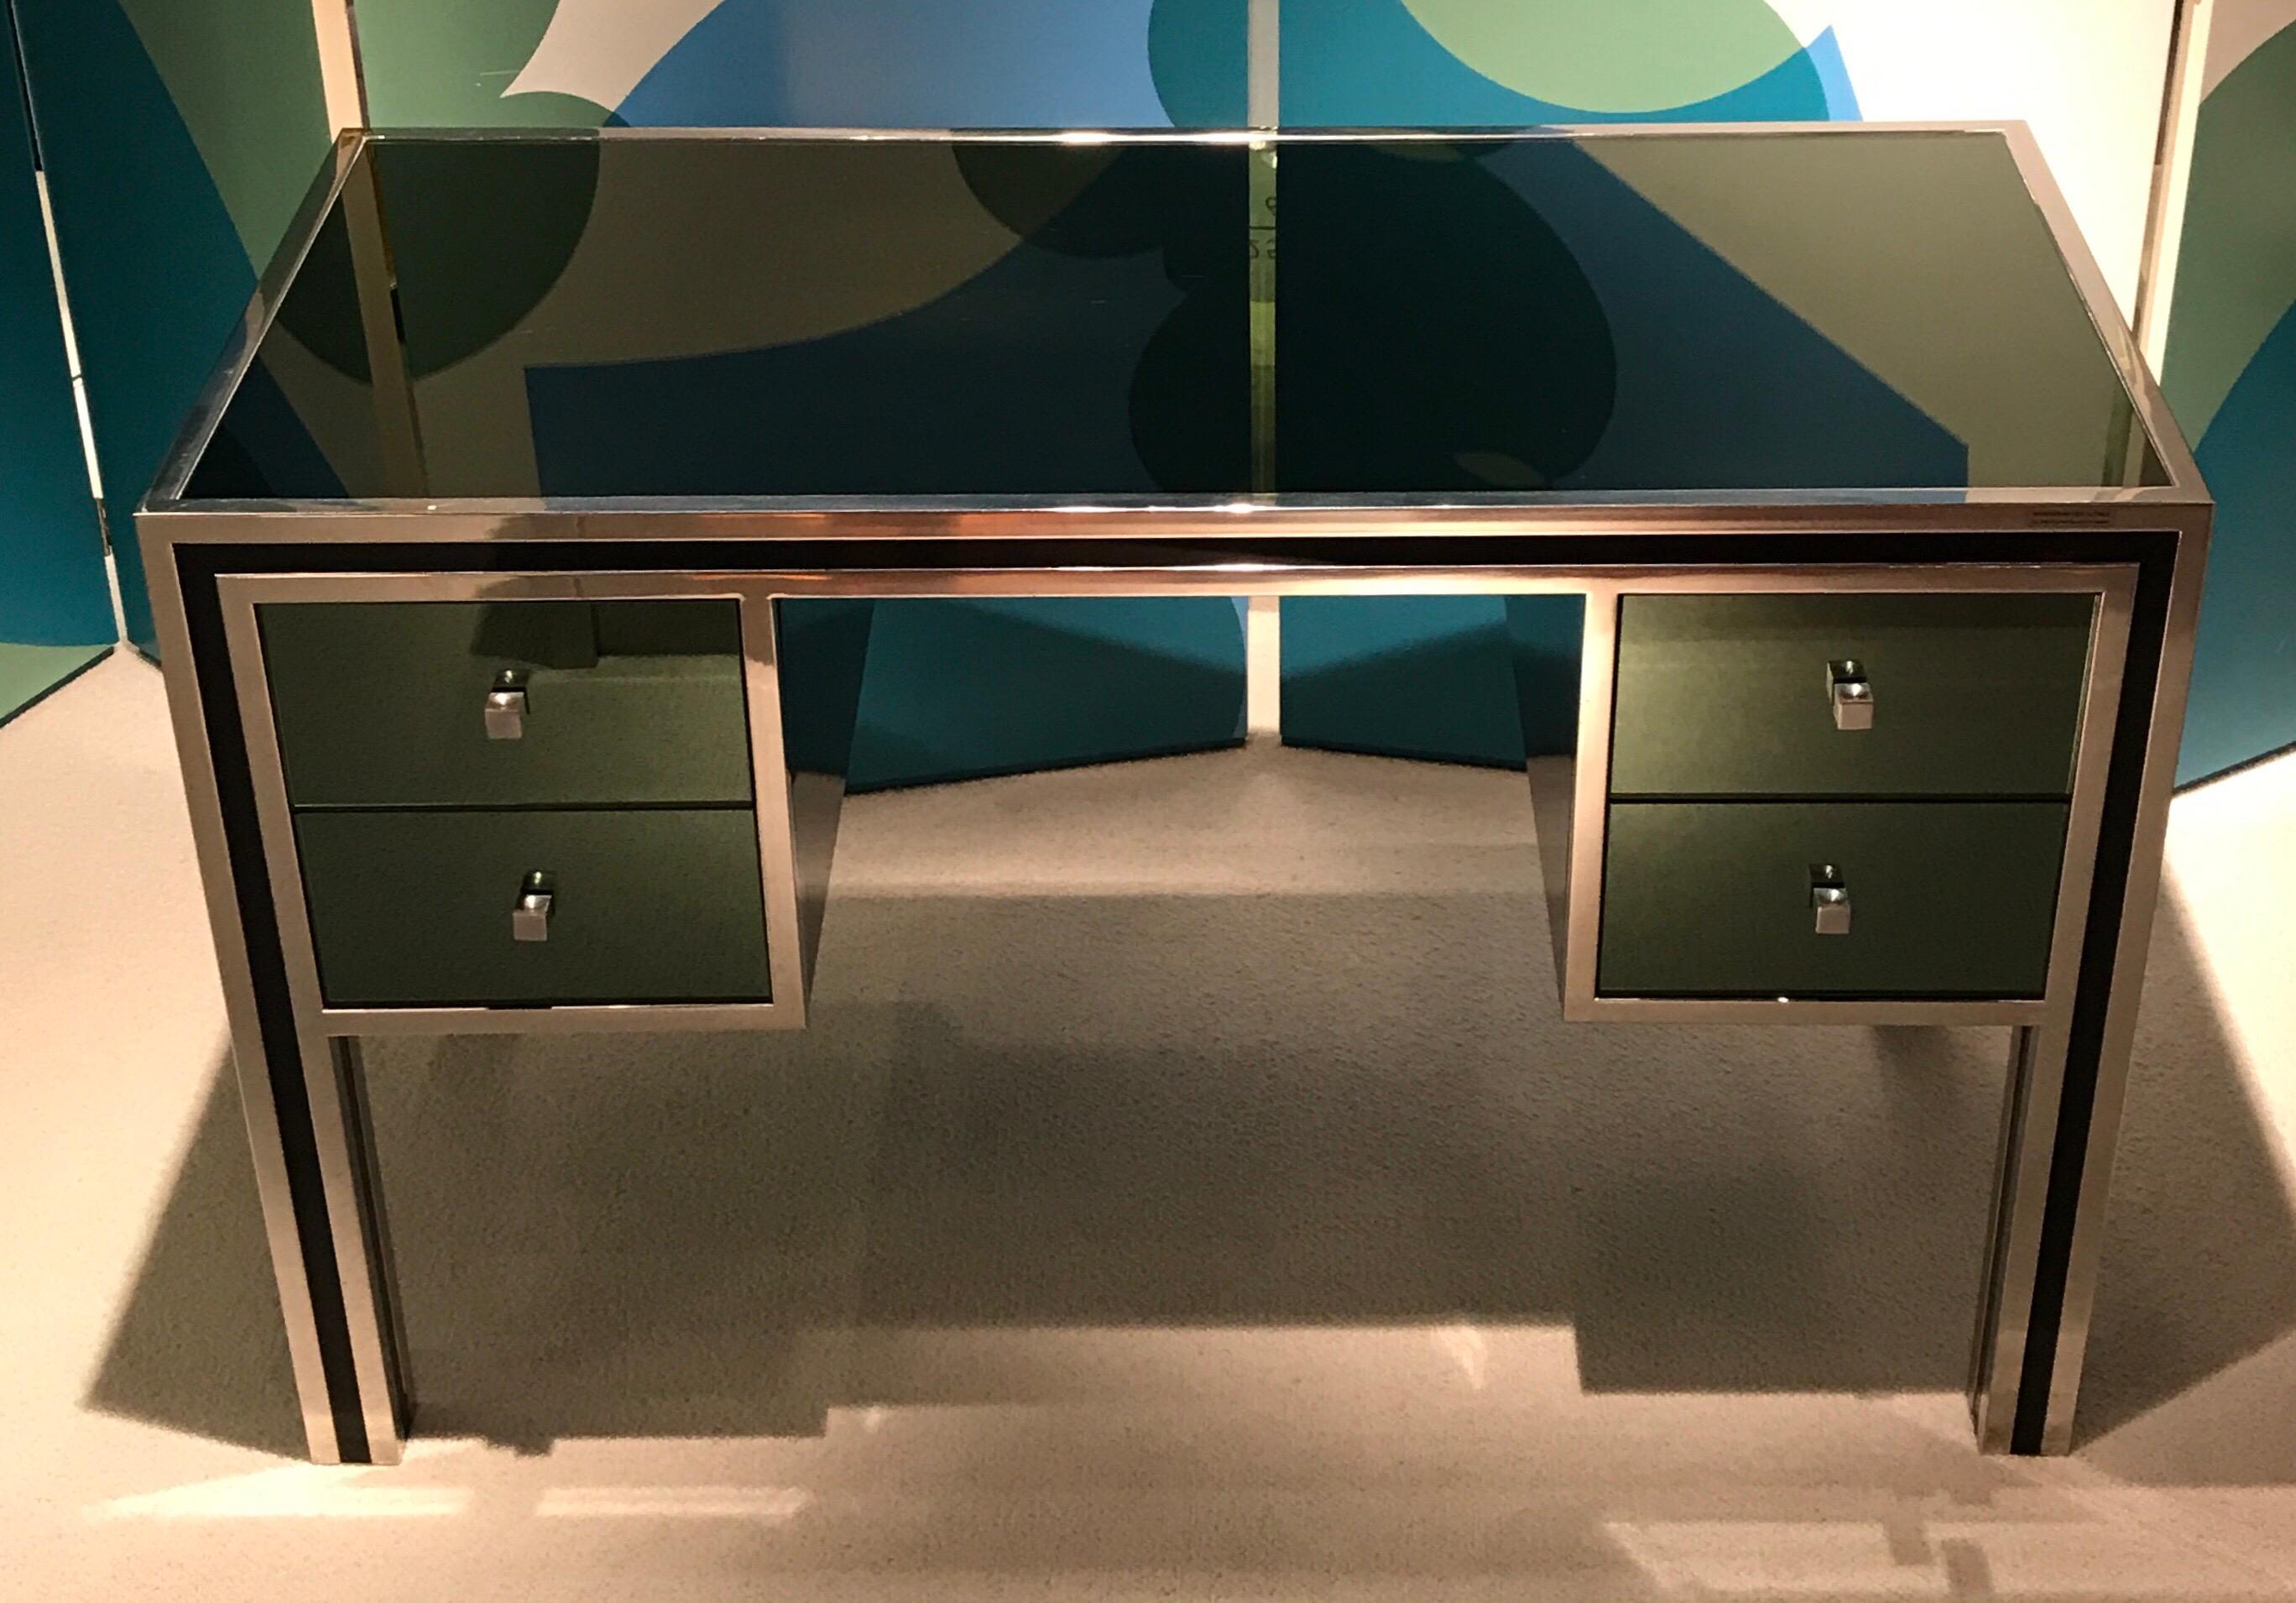 1970s mirrored desk with chrome details and black lacquered metal.
Designed by Angolo Metallarte in Italy and retailed by Michel Pigneres in Paris
4 drawers
Great quality.